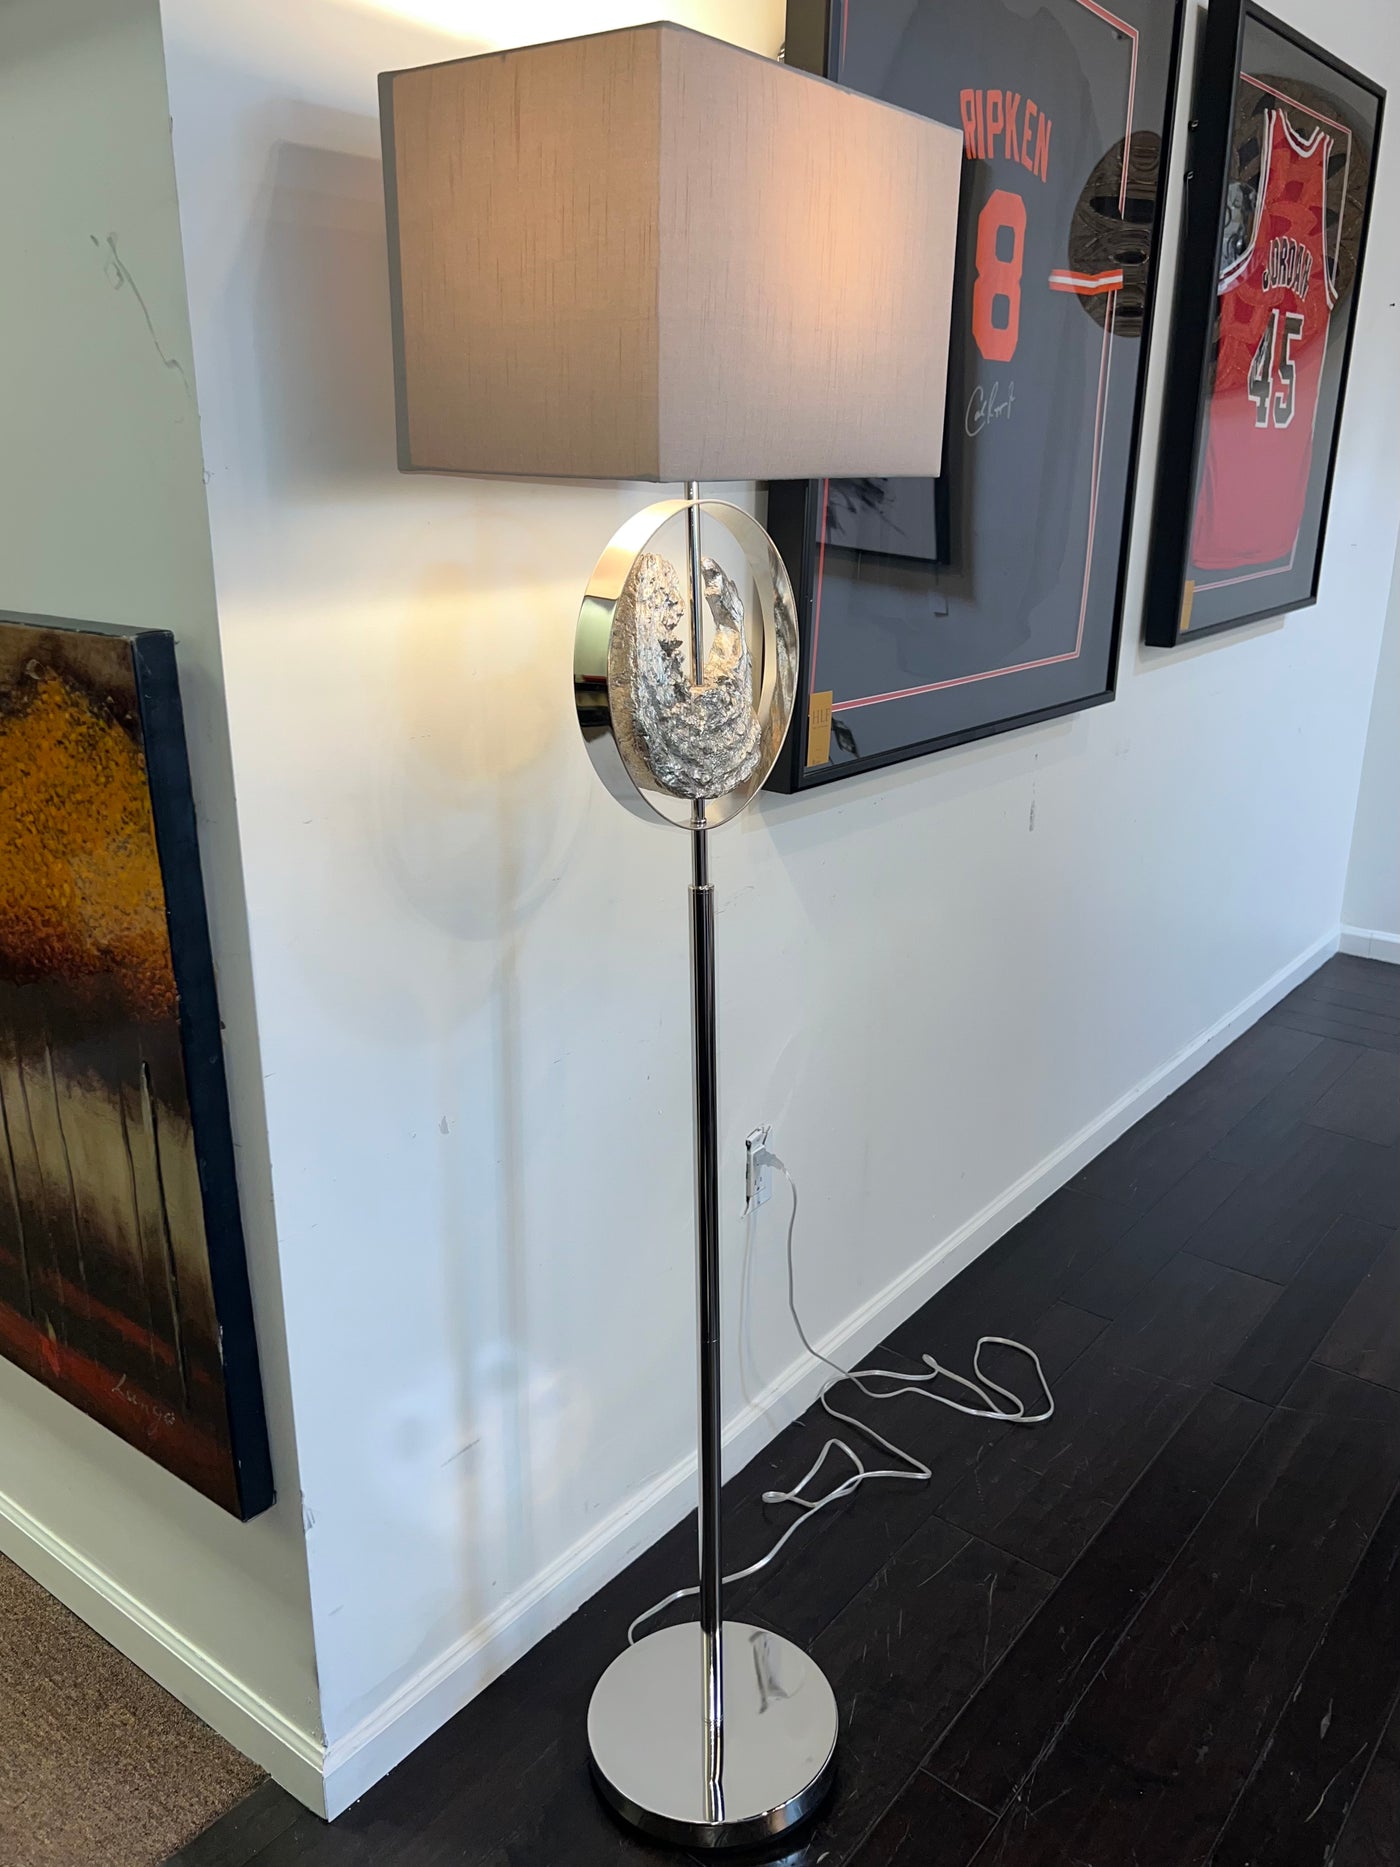 Uttermost Contemporary Floor Lamp - 2 Available